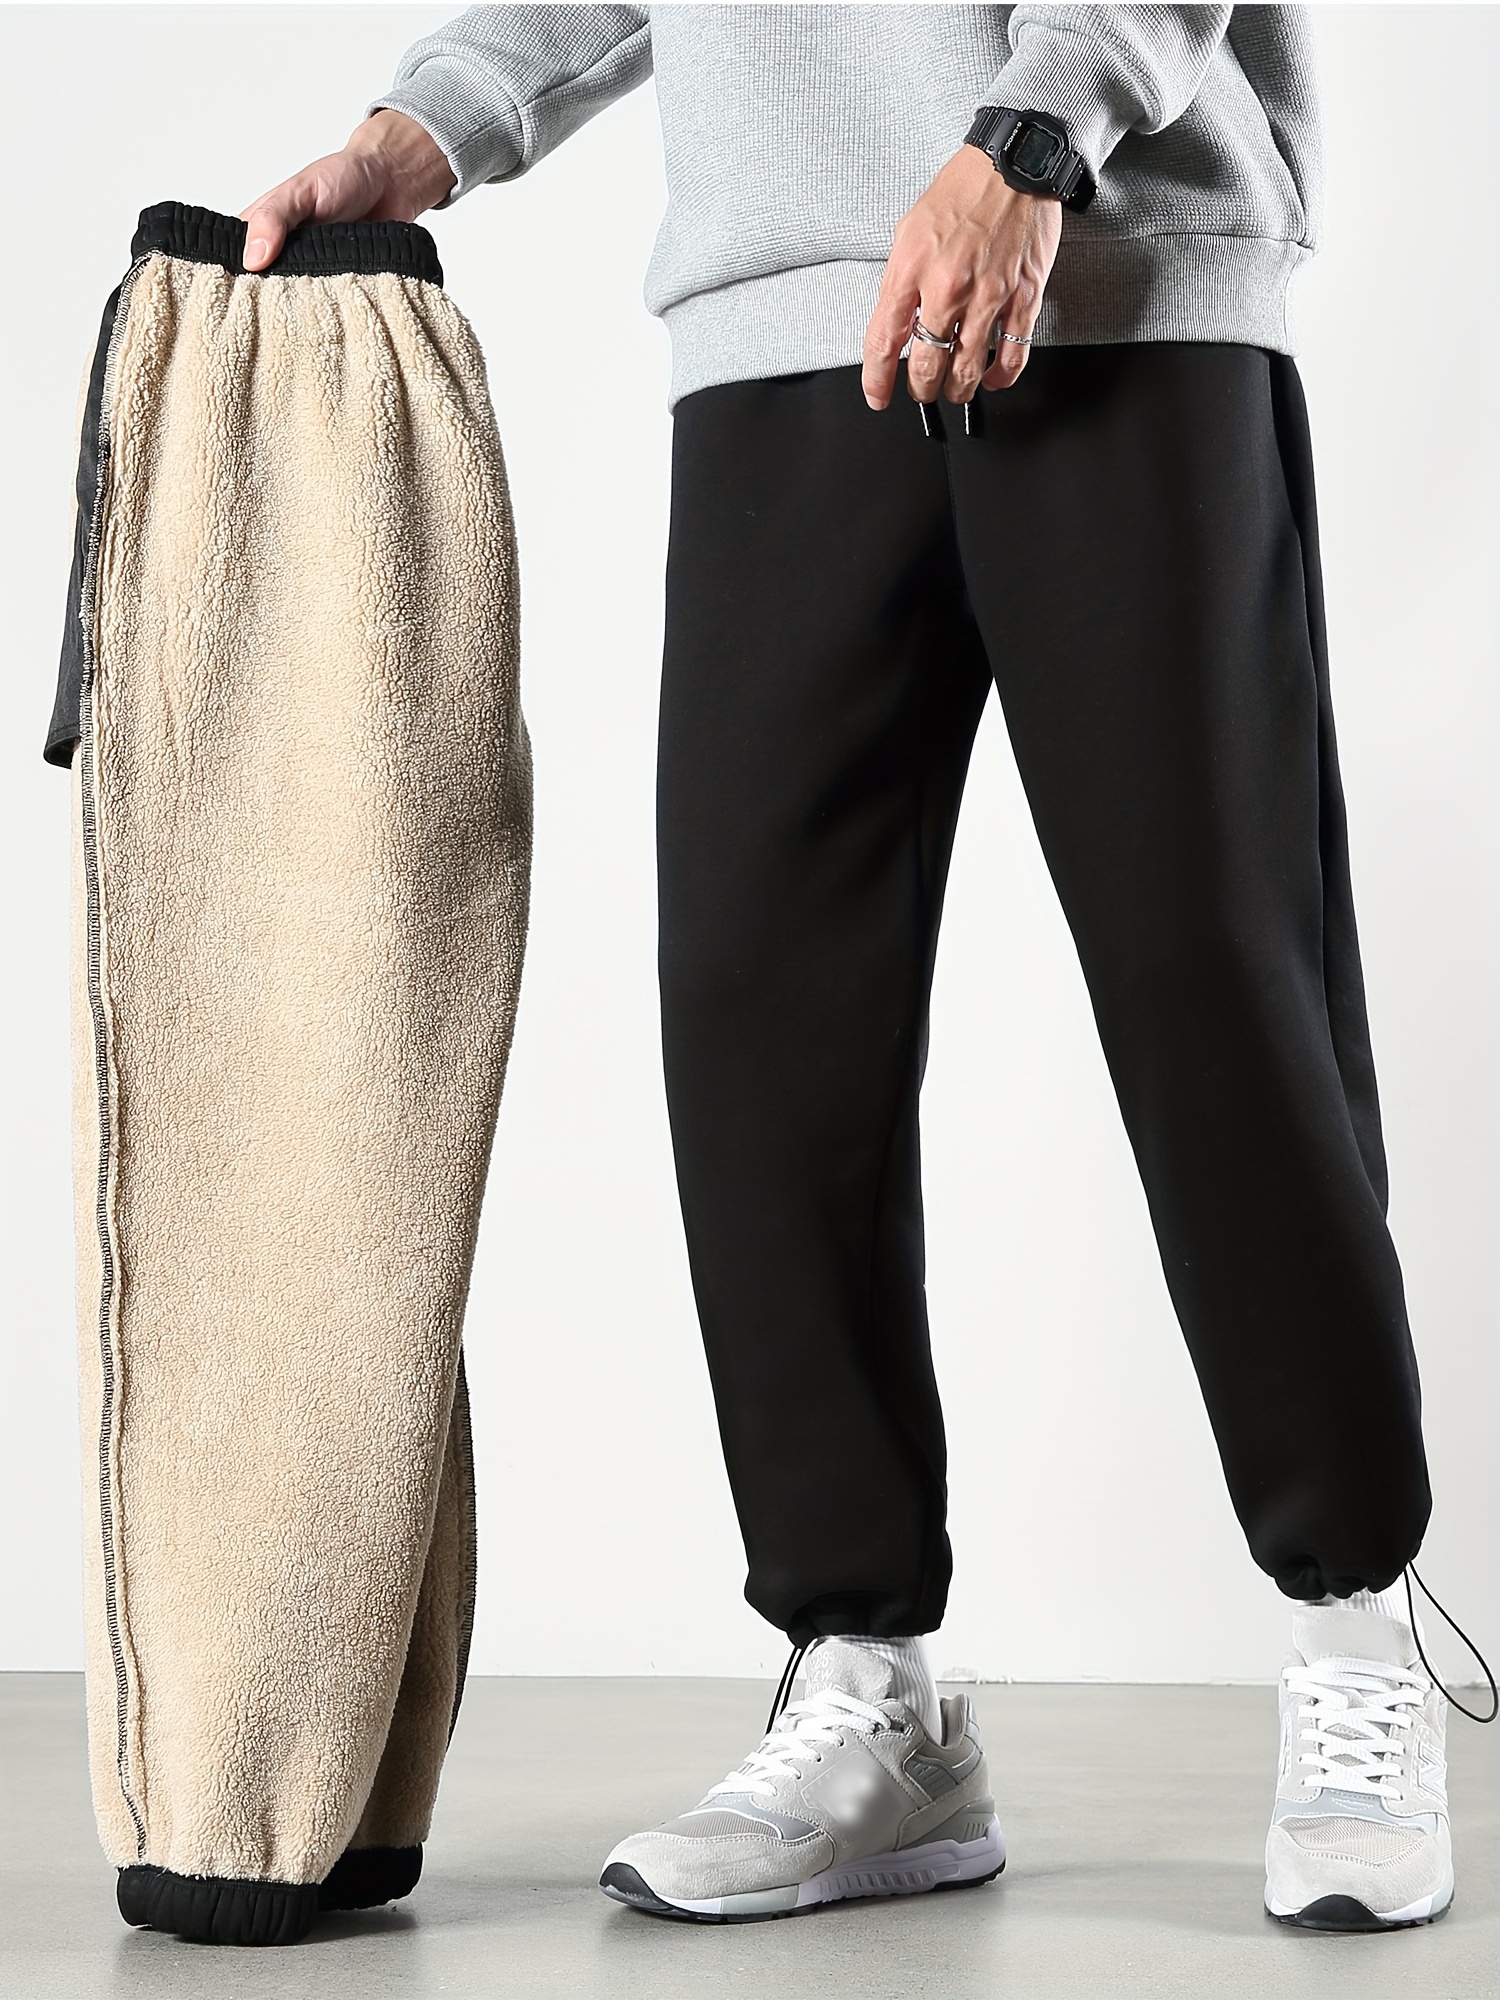 Men's Thermal Pants Elastic Waist Sherpa Flannel Lined Athletic Sweatpants Winter  Fleece Casual Pants Big&Tall Black at  Men's Clothing store